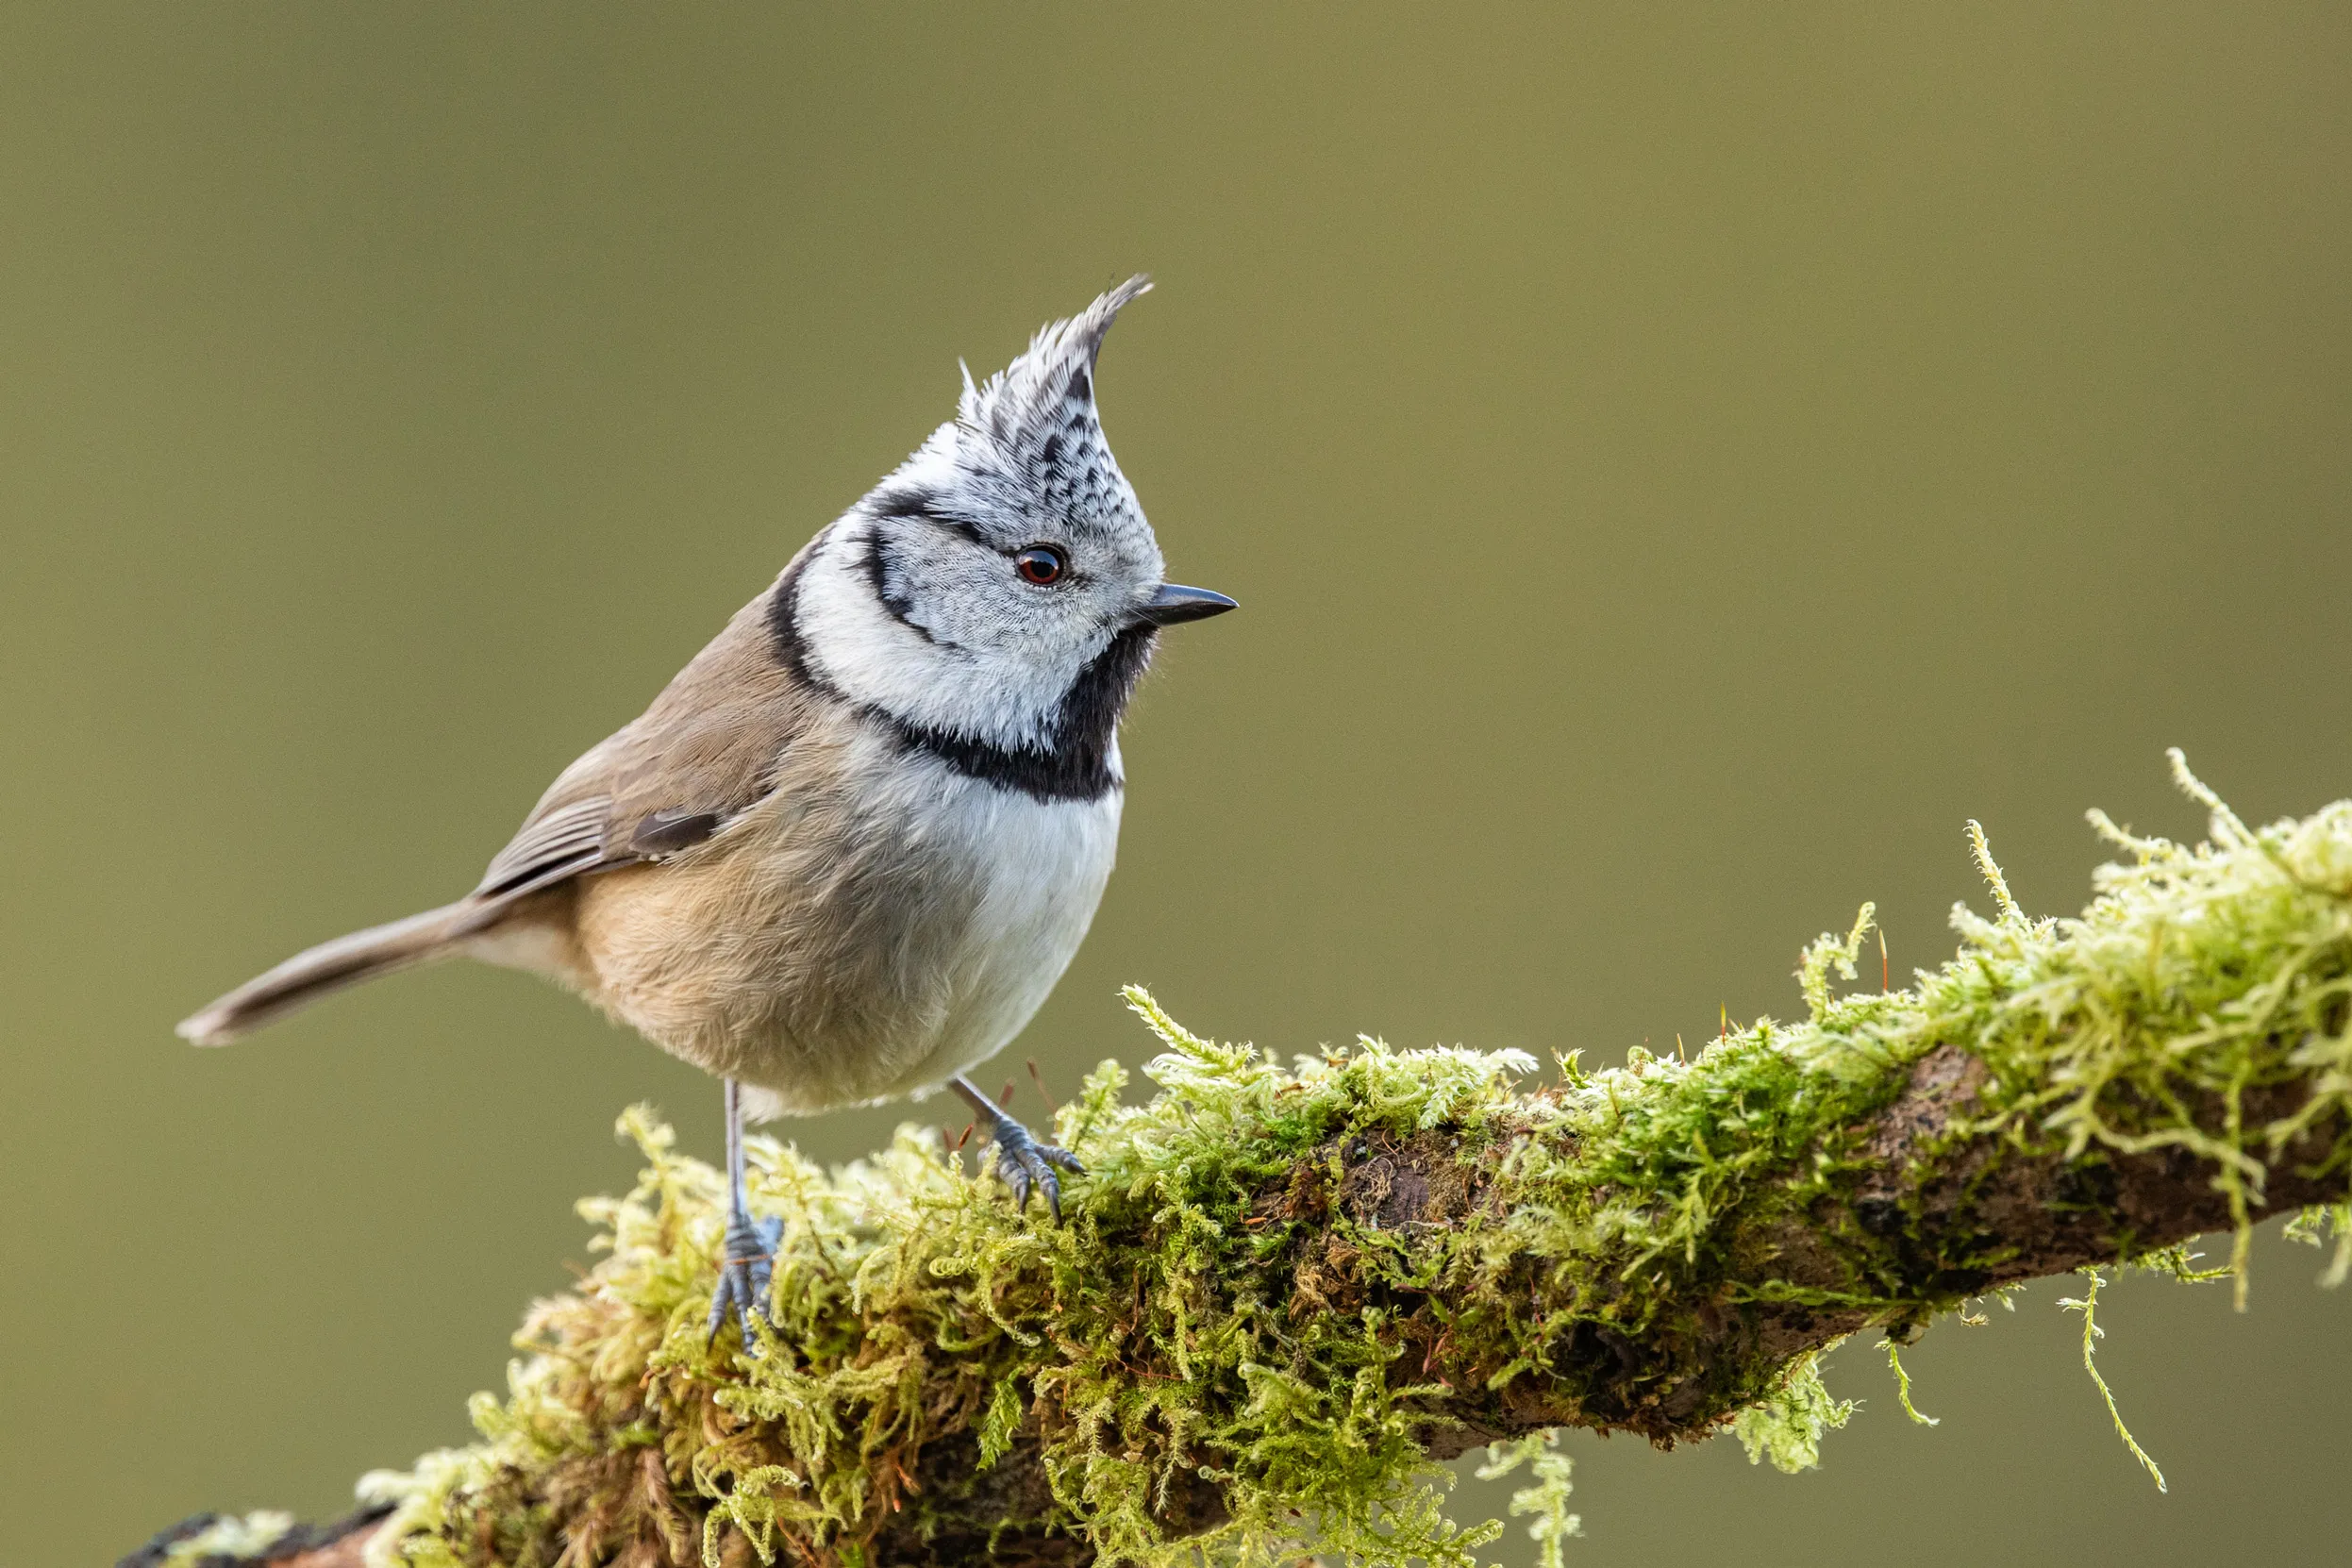 A lone Crested Tit perched on a moss covered branch.